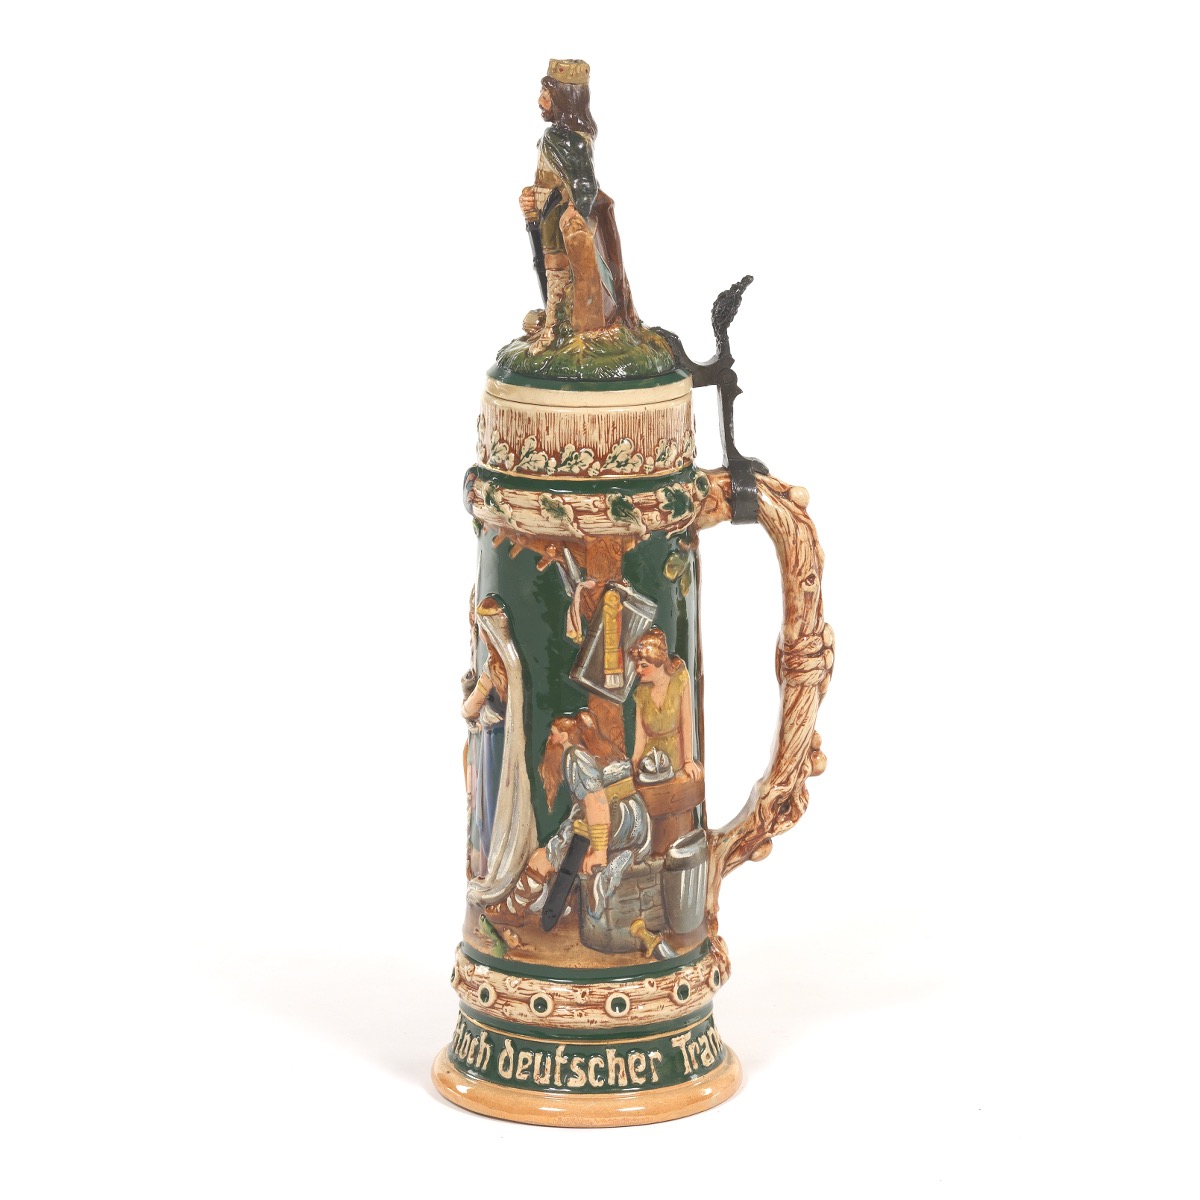 German Ceramic Stein "The Ring of the Nibelung" - Image 3 of 10